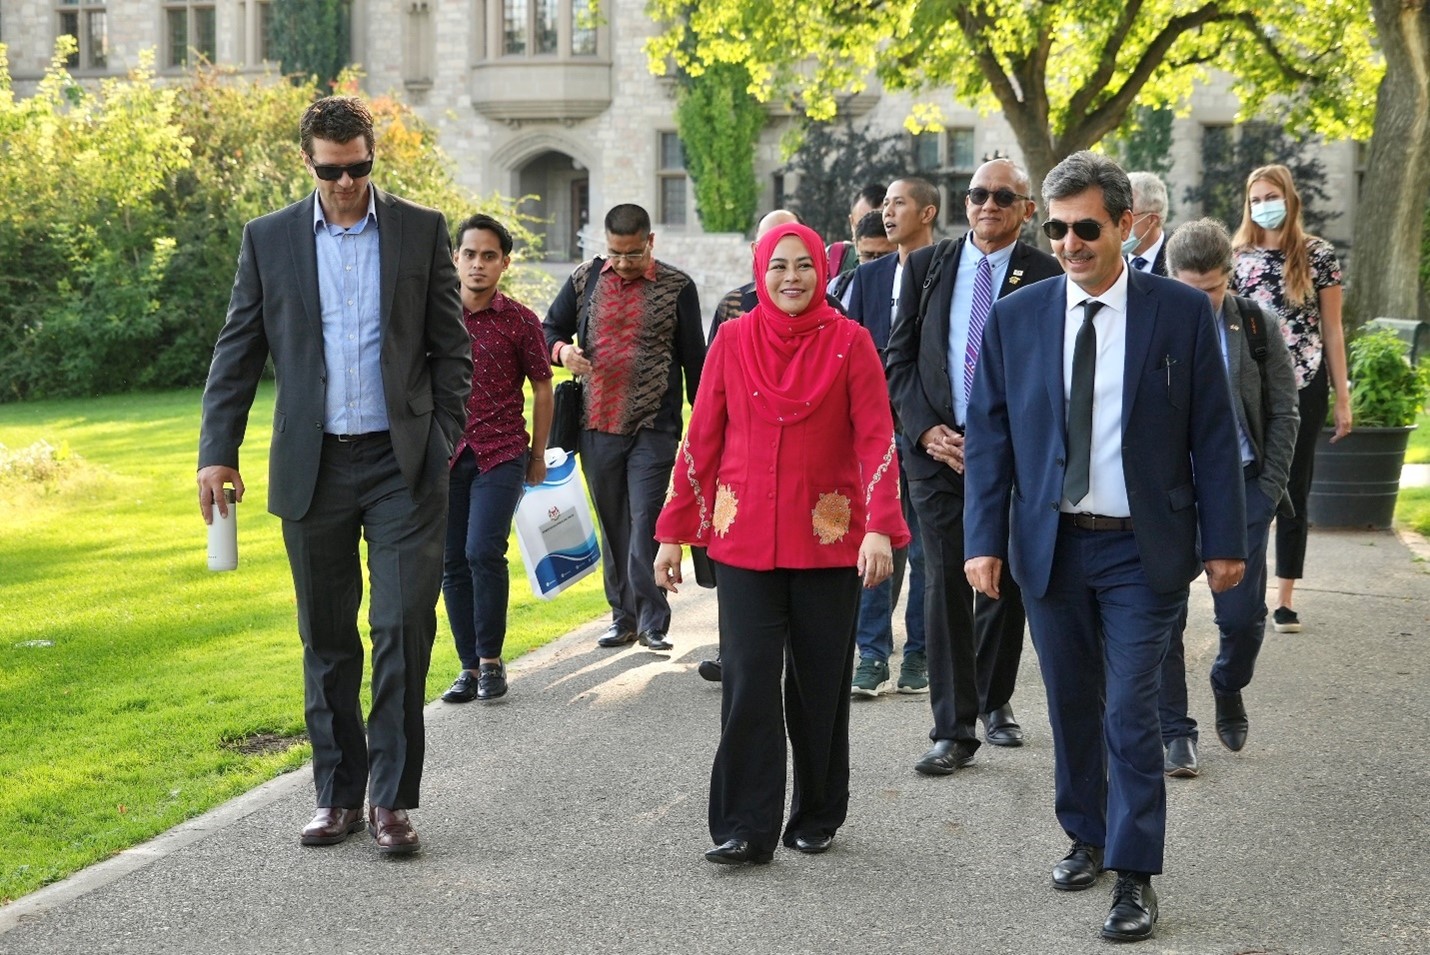 Dr. Hassan Vatanparast from the College of Pharmacy and Nutrition and School of Public Health (right) leads Dr. Ahmad (center) and the UMT delegation on a tour of campus. 